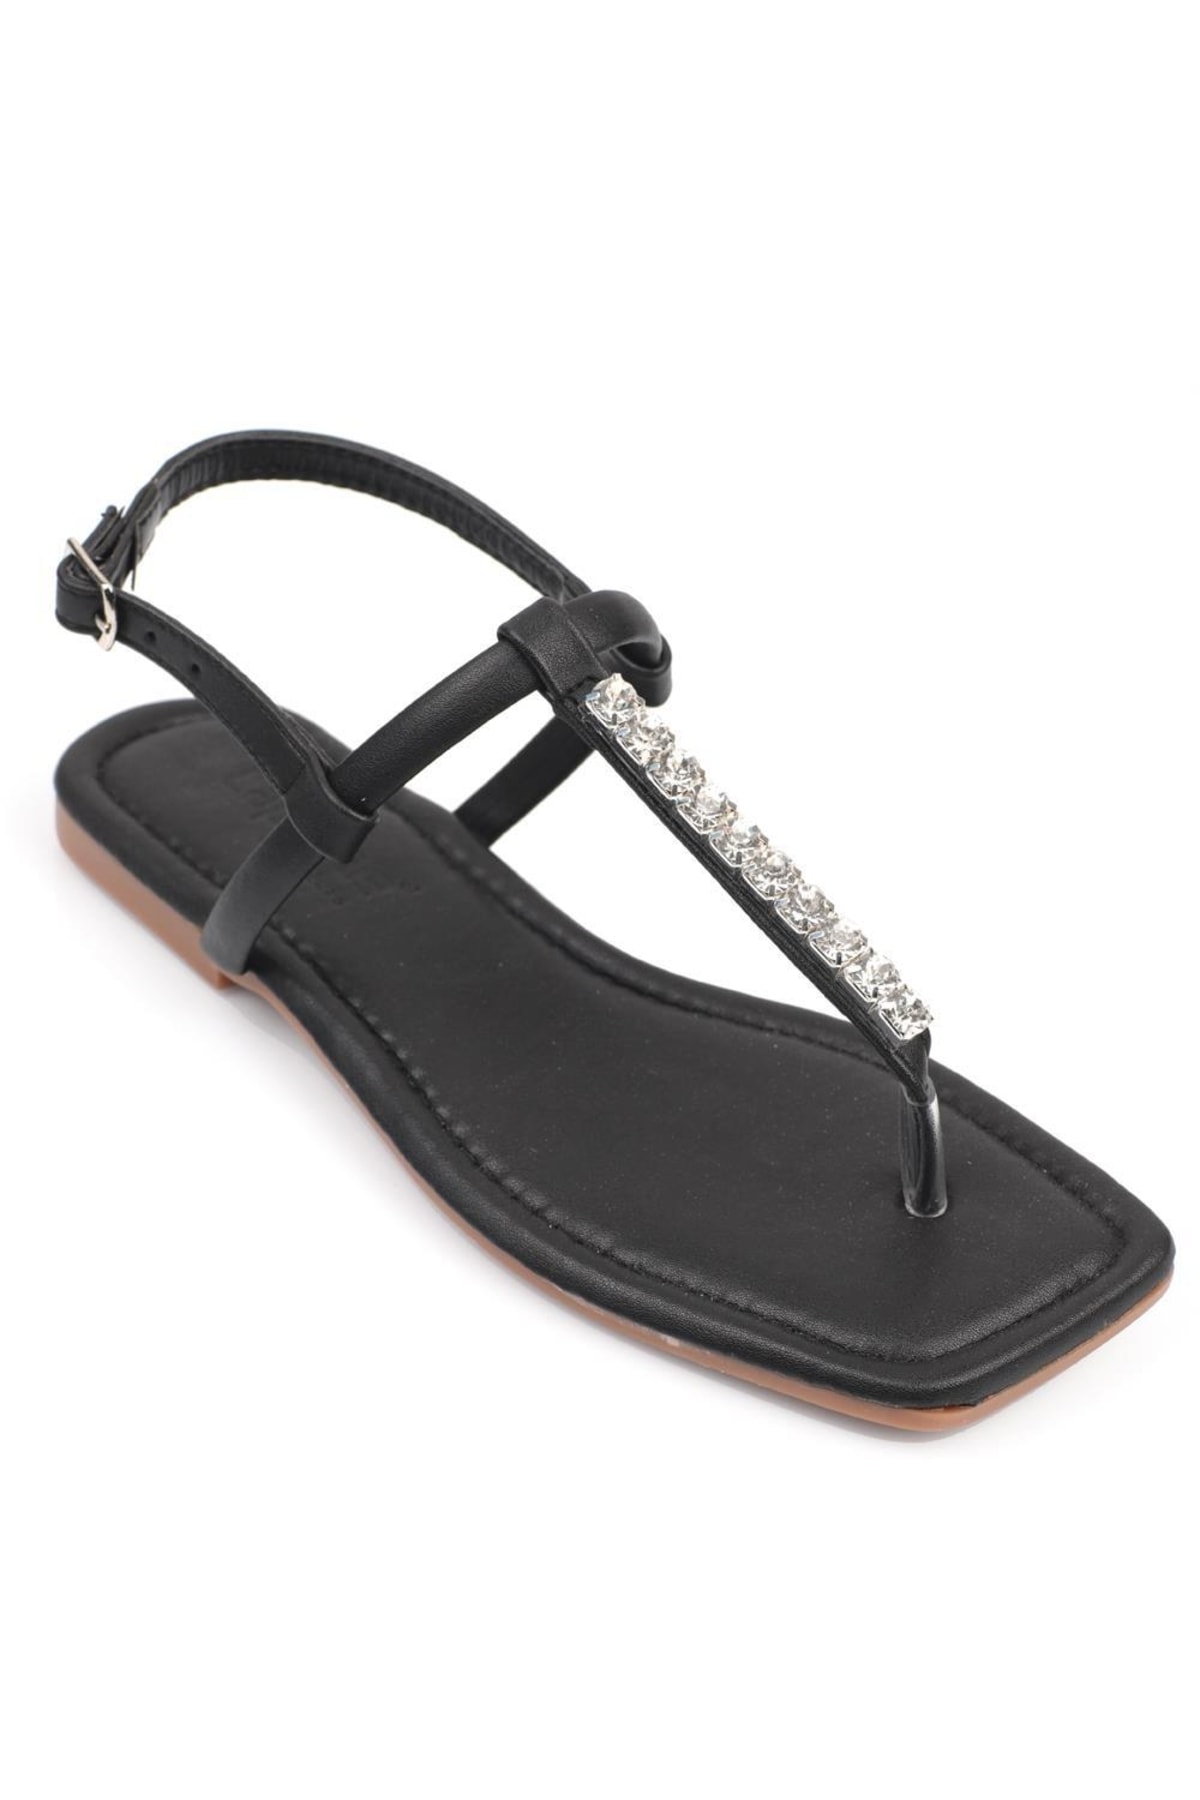 Levně Capone Outfitters Capone Binoculars Women's Ankle Strap Flat Heel Sandals with Stones.